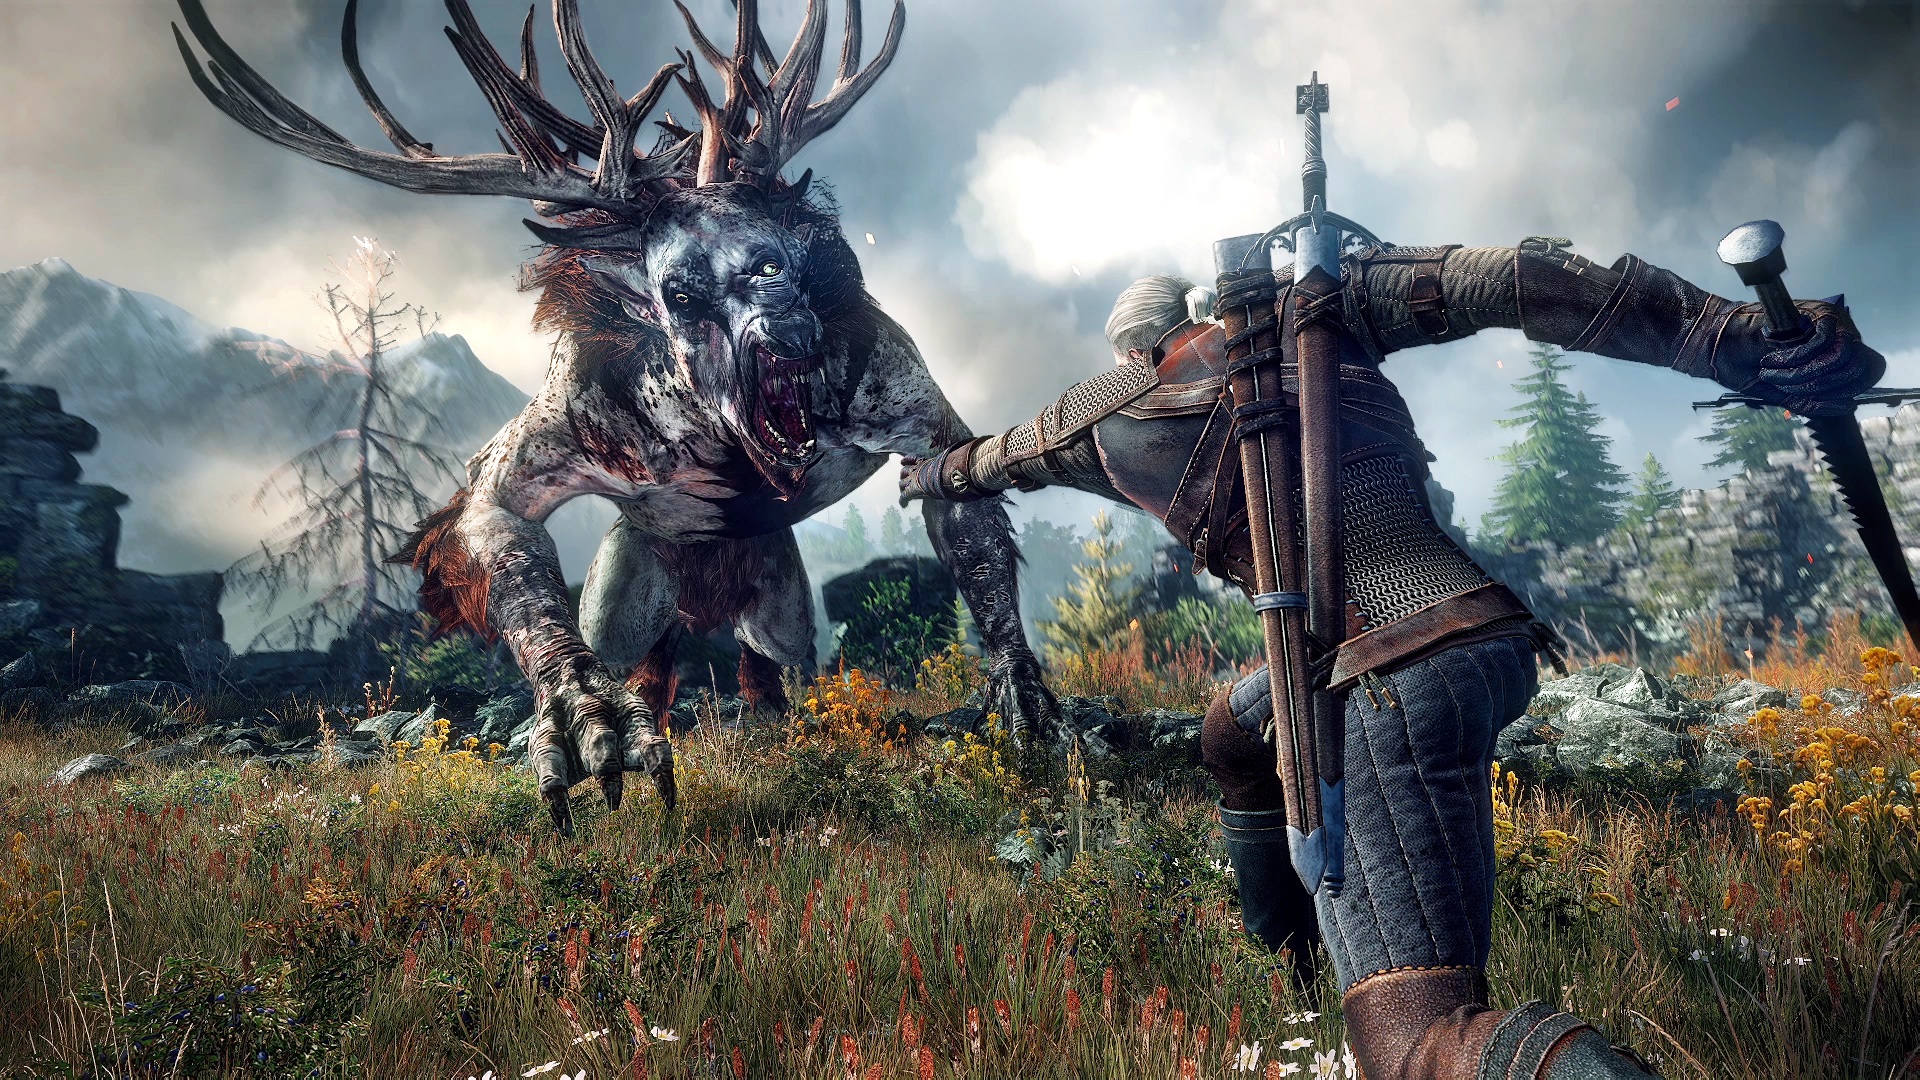 CD Projekt RED史上最大のゲーム『The Witcher 3』